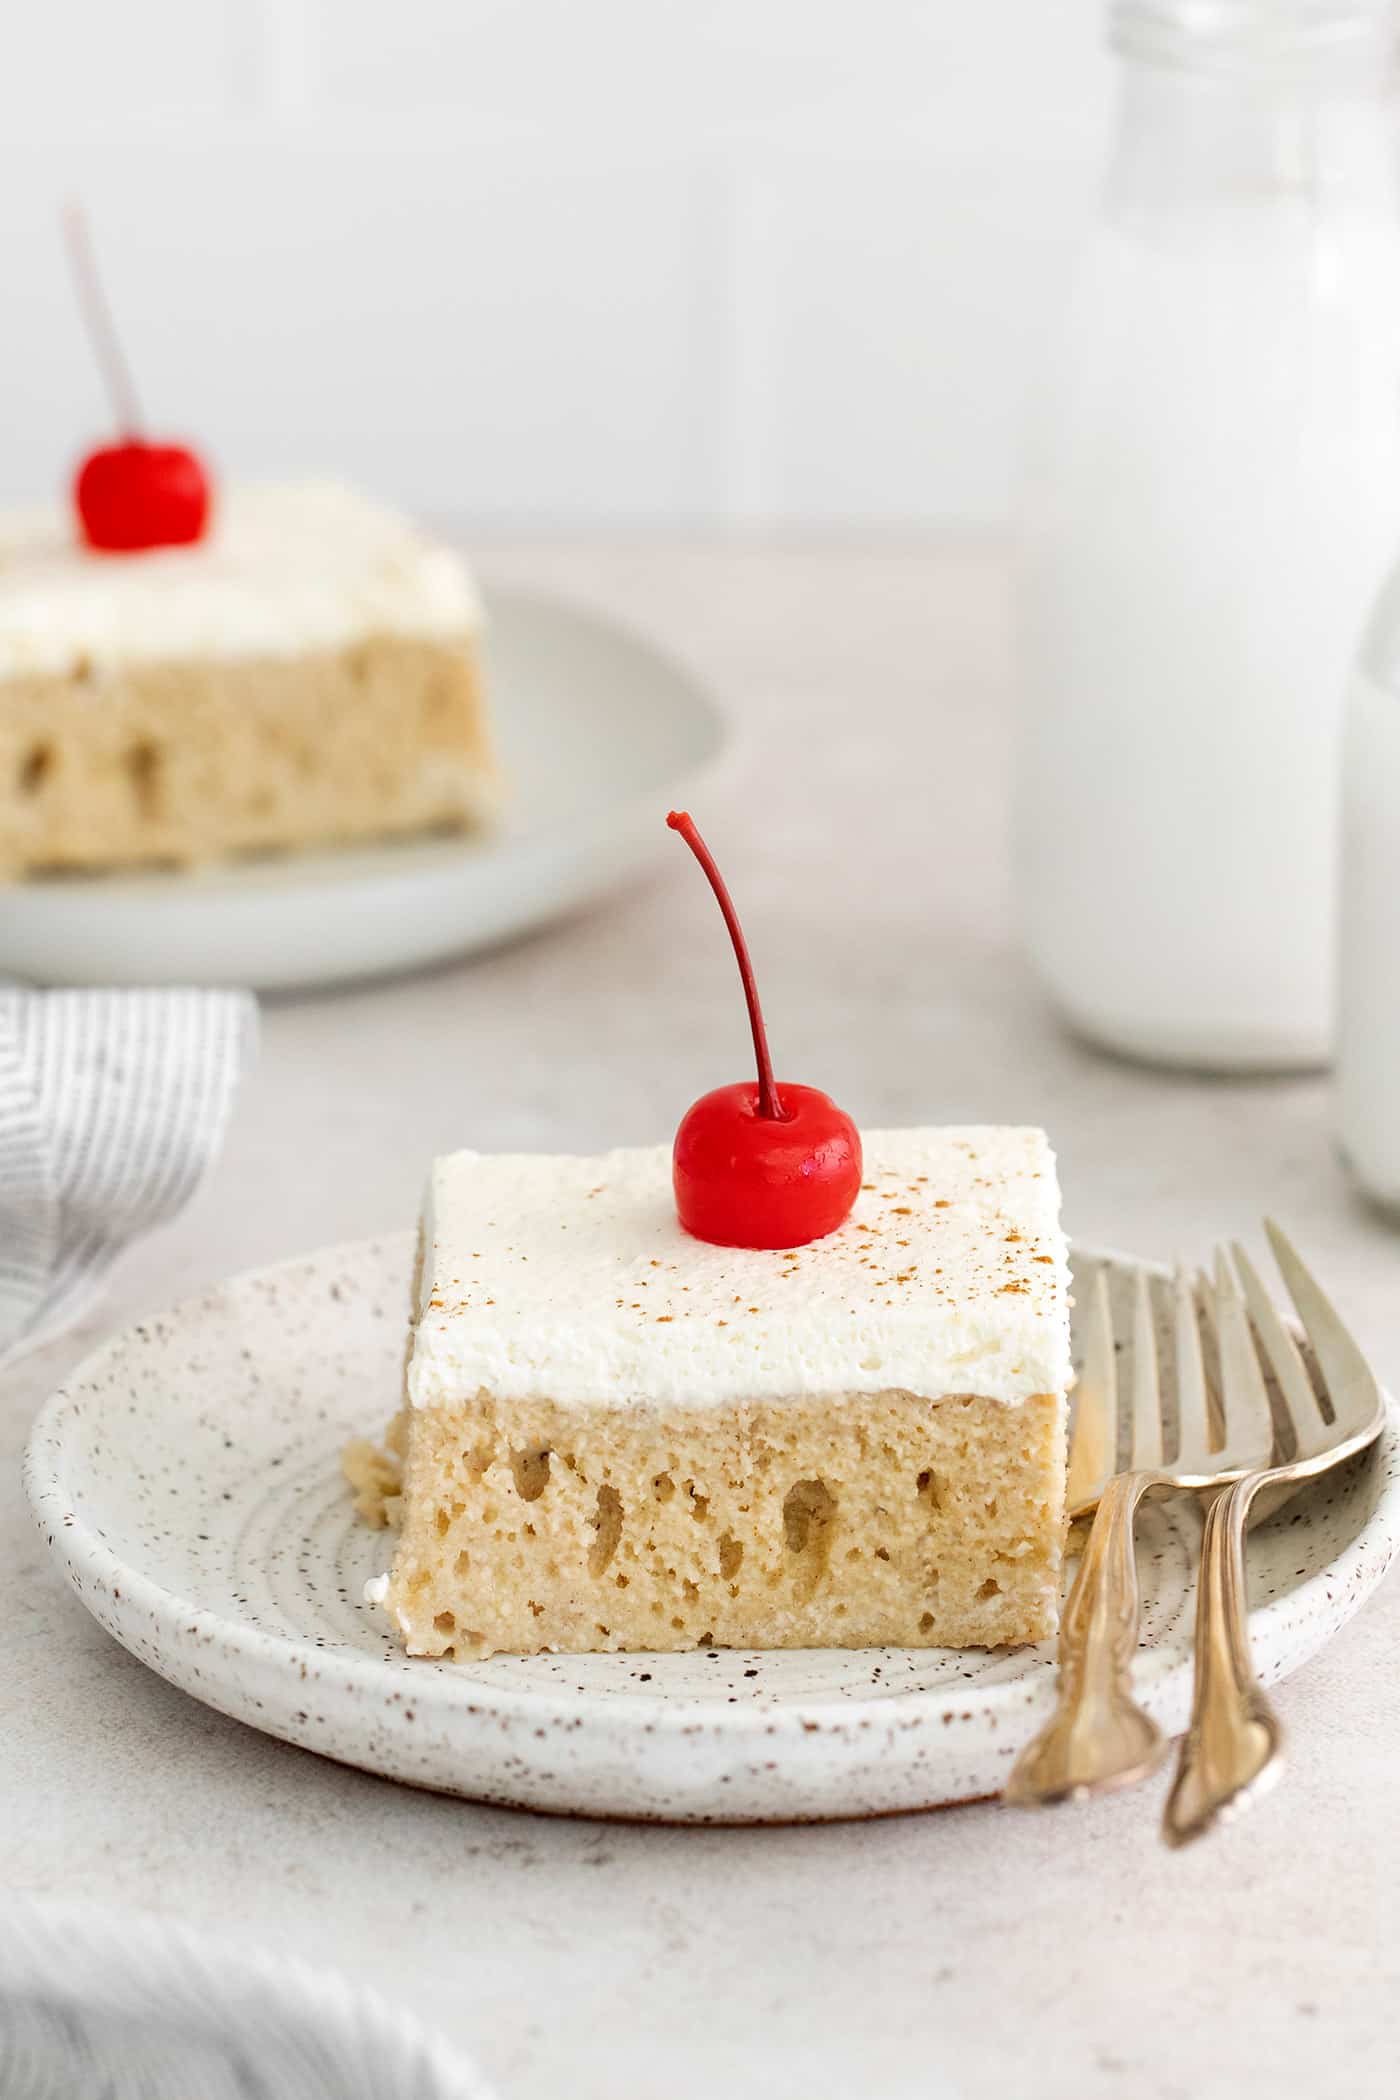 A slice of tres leche cake with a cherry on a plate